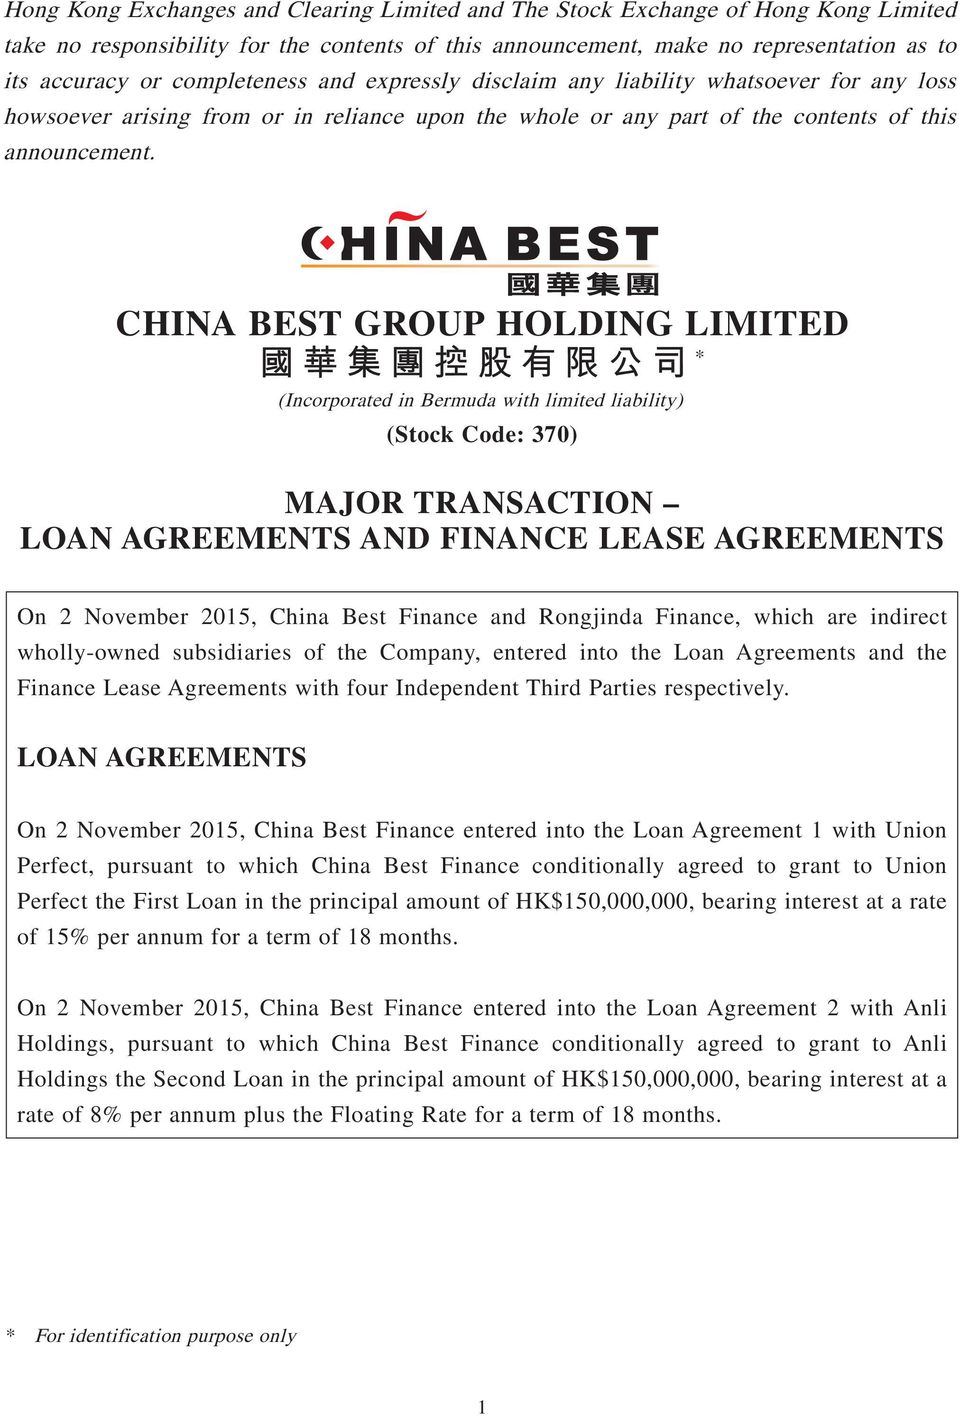 CHINA BEST GROUP HOLDING LIMITED * (Incorporated in Bermuda with limited liability) (Stock Code: 370) MAJOR TRANSACTION LOAN AGREEMENTS AND FINANCE LEASE AGREEMENTS On 2 November 2015, China Best